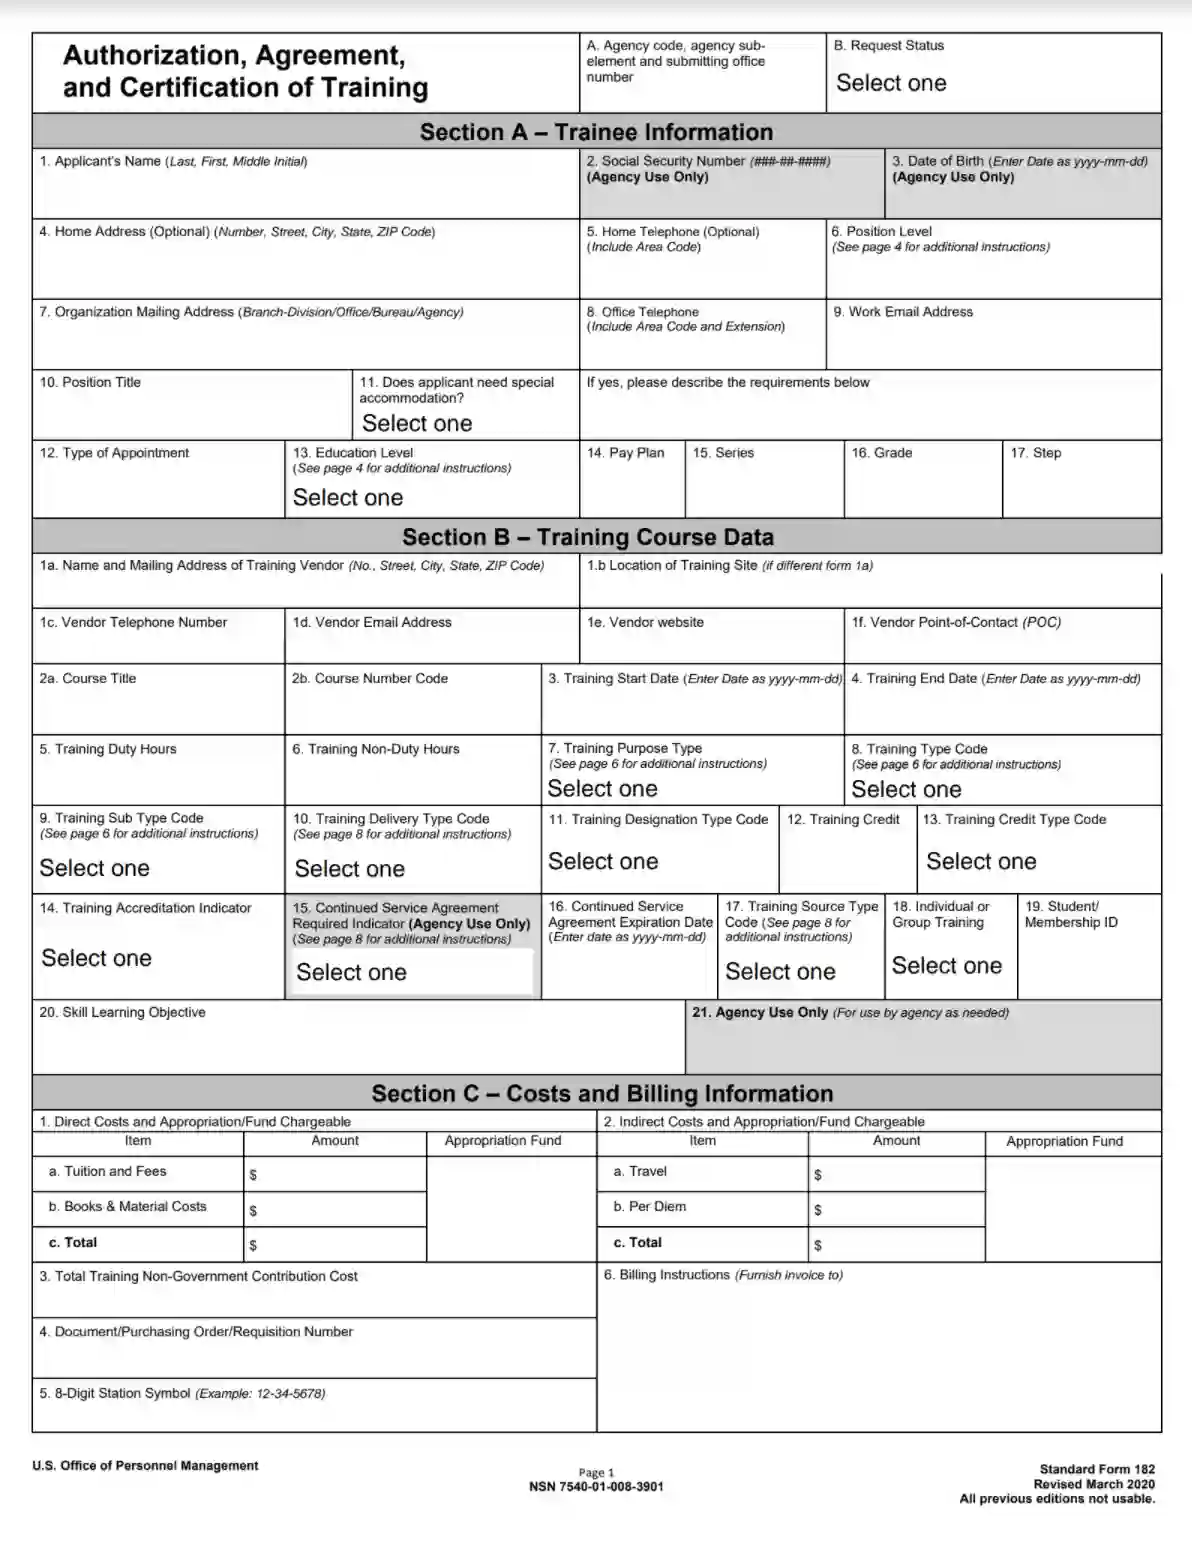 opm sf-182 form